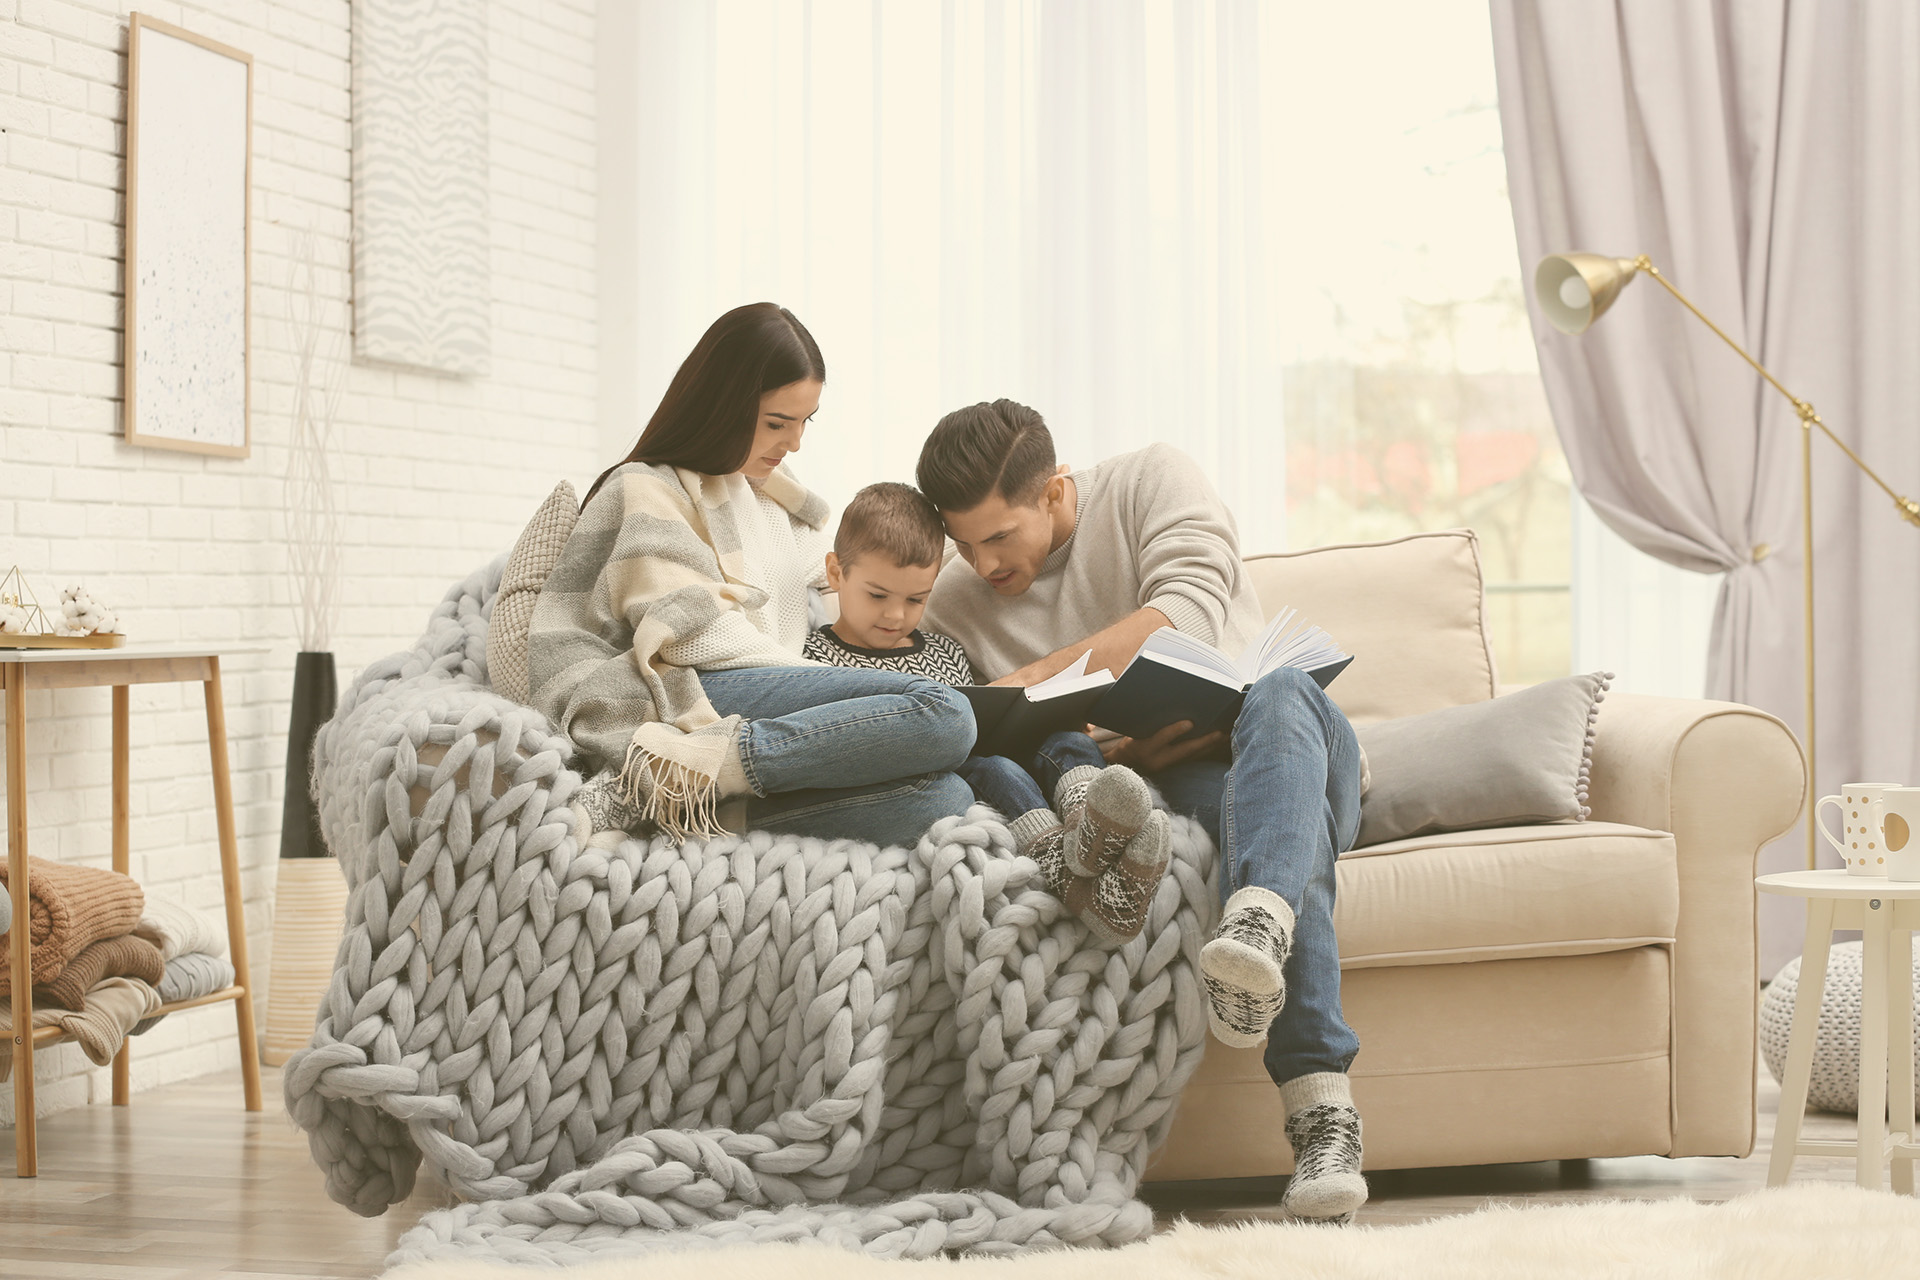 A young family reads on a small couch. This image is for an article about how to prepare for a winter storm in an apartment. The article includes tips on gathering emergency supplies, how to keep perishable foods safe and more.